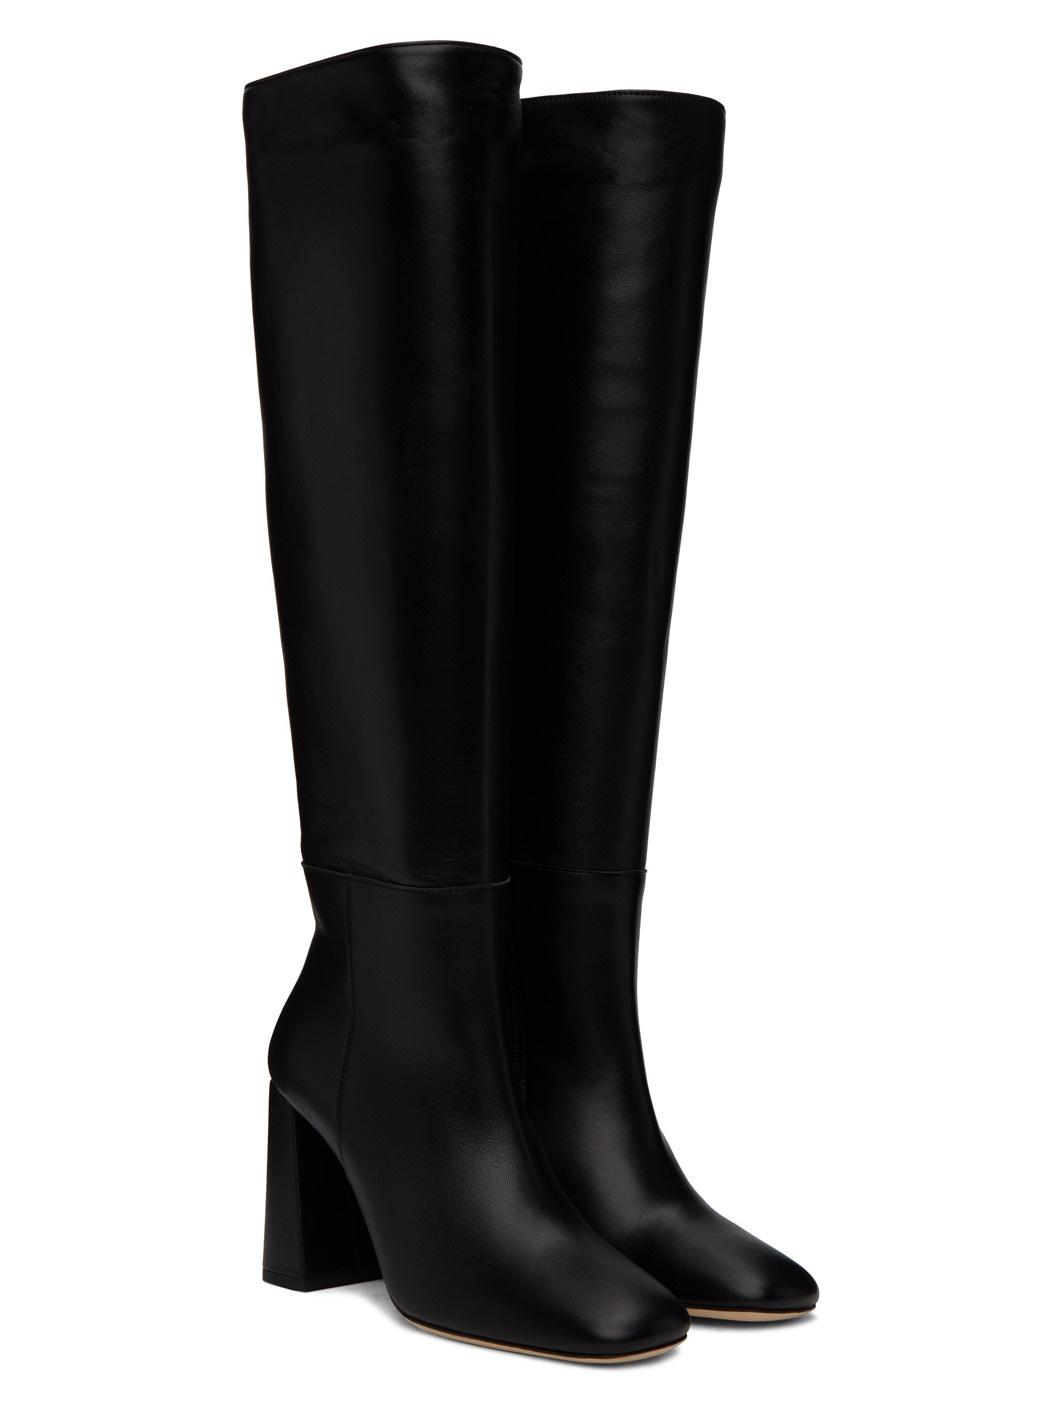 Black Syd Boots - 4